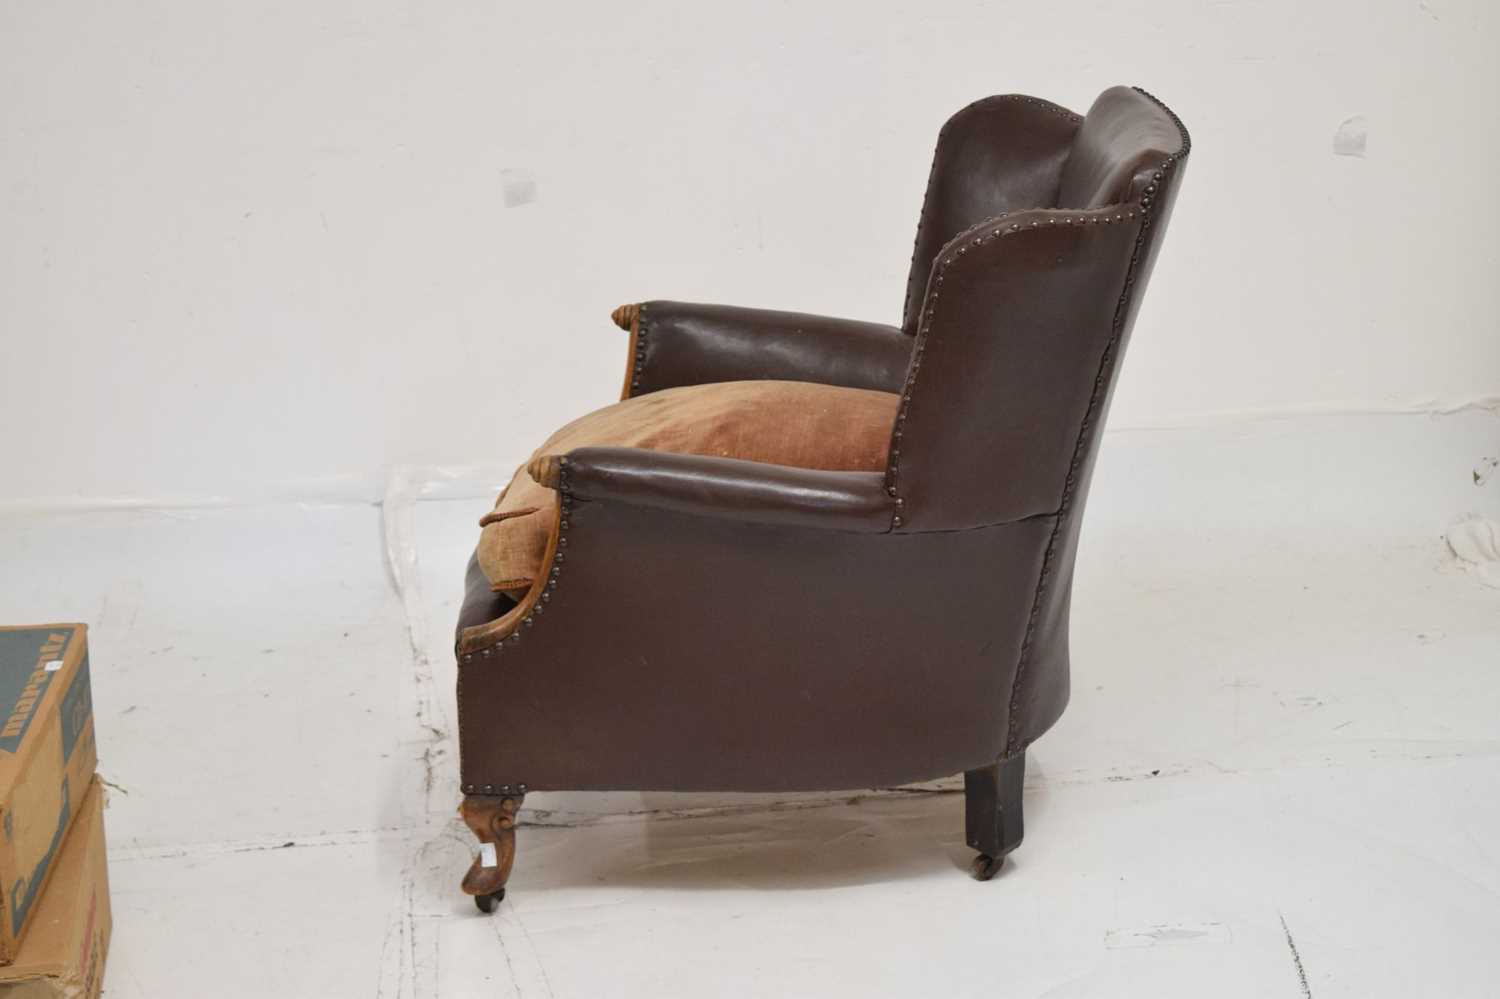 Early 20th century studded brown leatherette fireside chair - Image 7 of 7